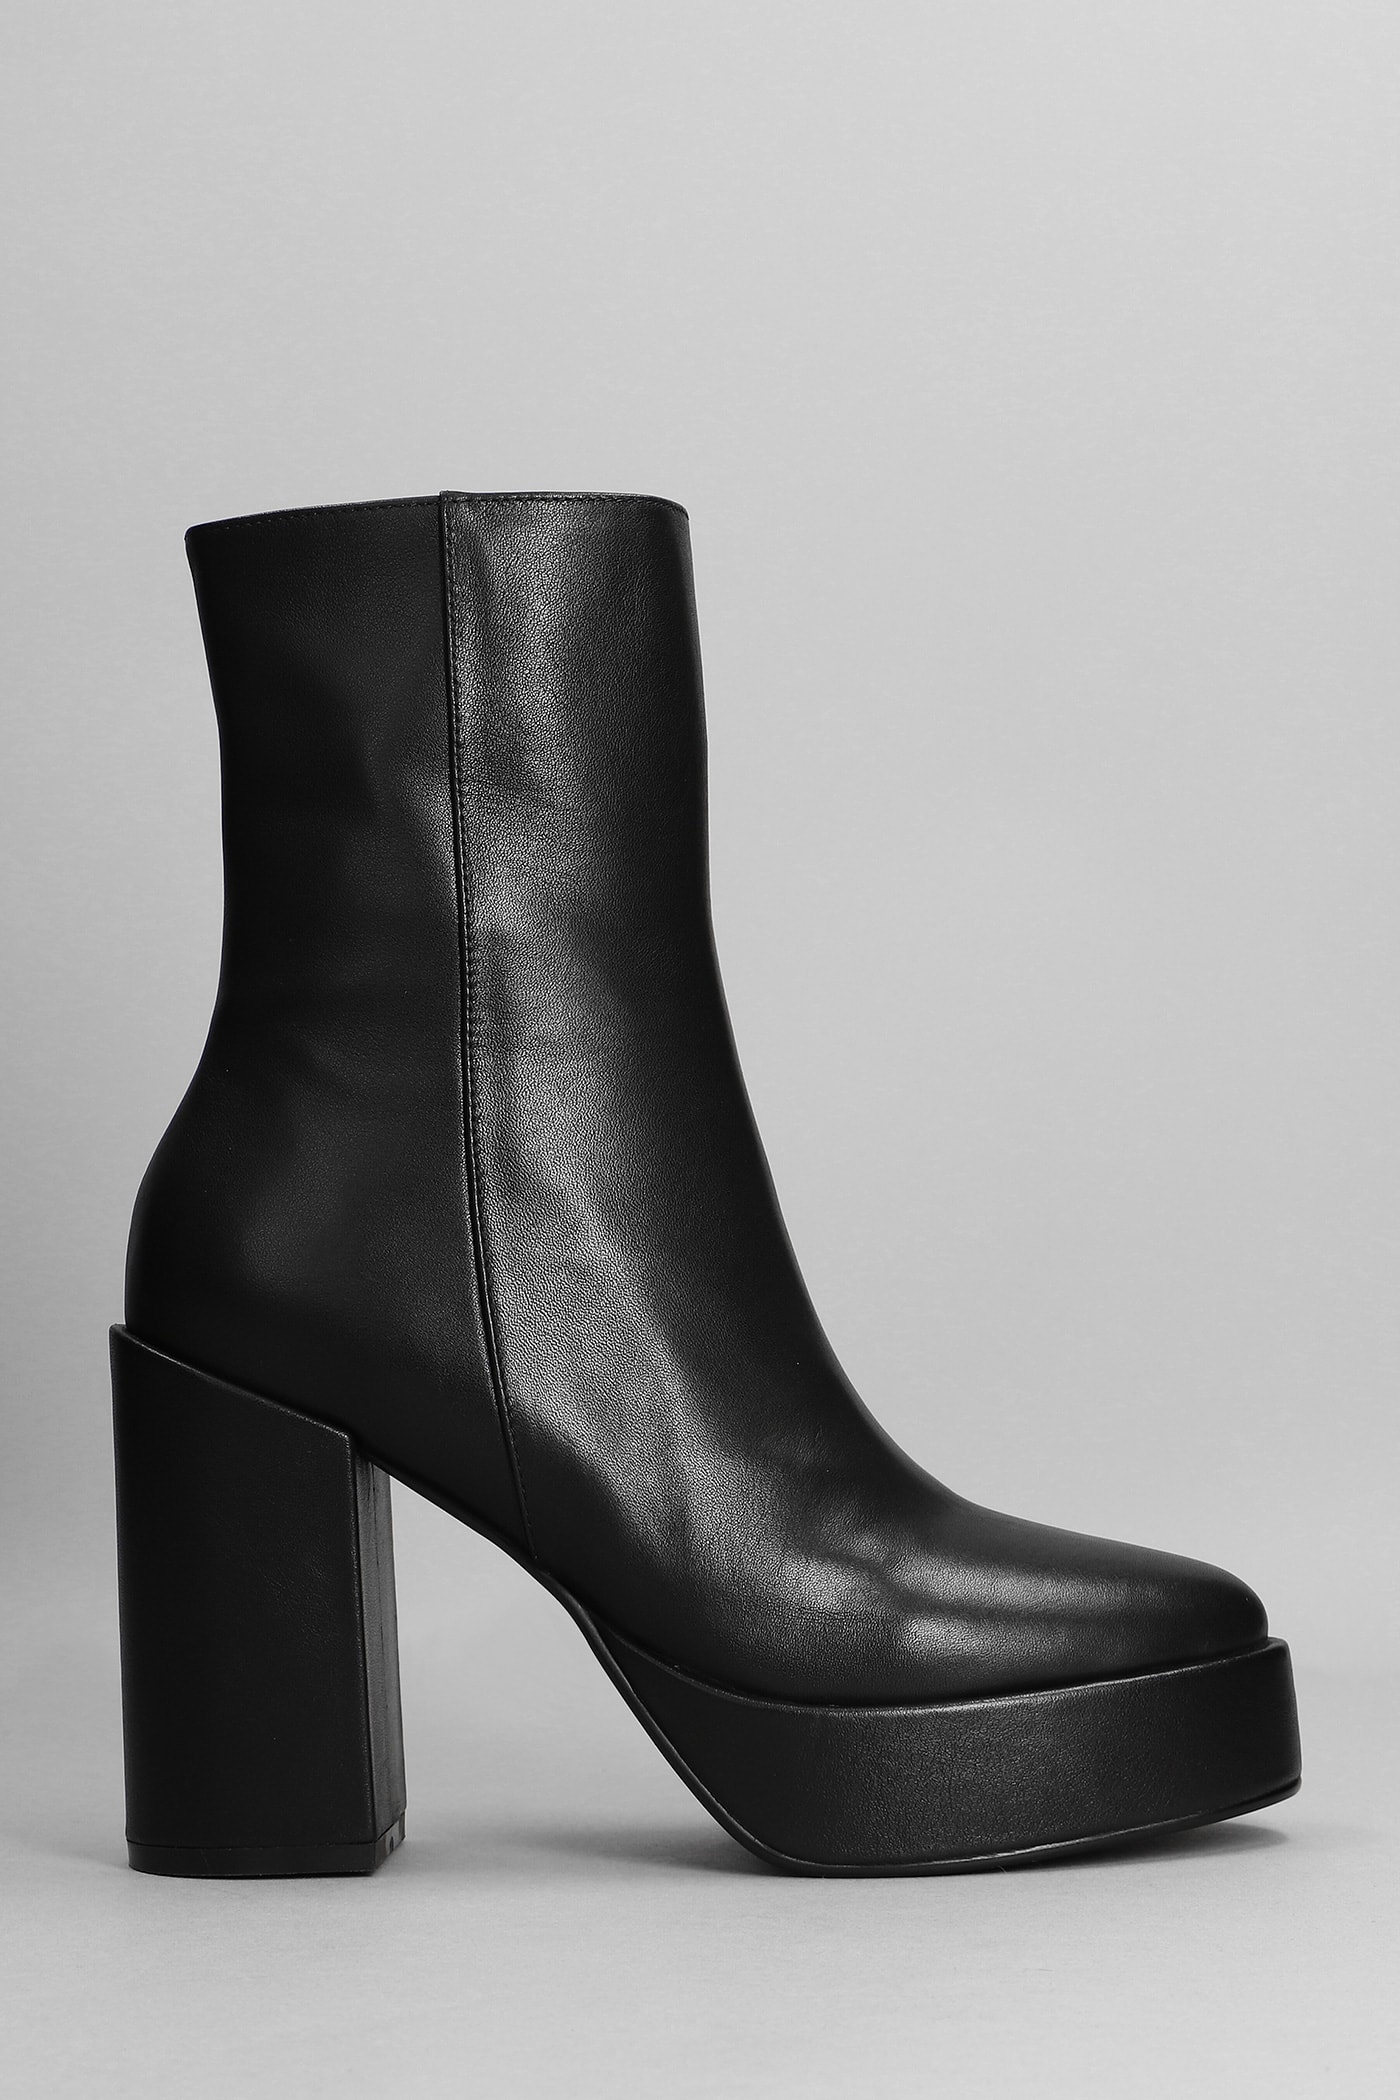 Bibi Lou High Heels Ankle Boots In Black Leather